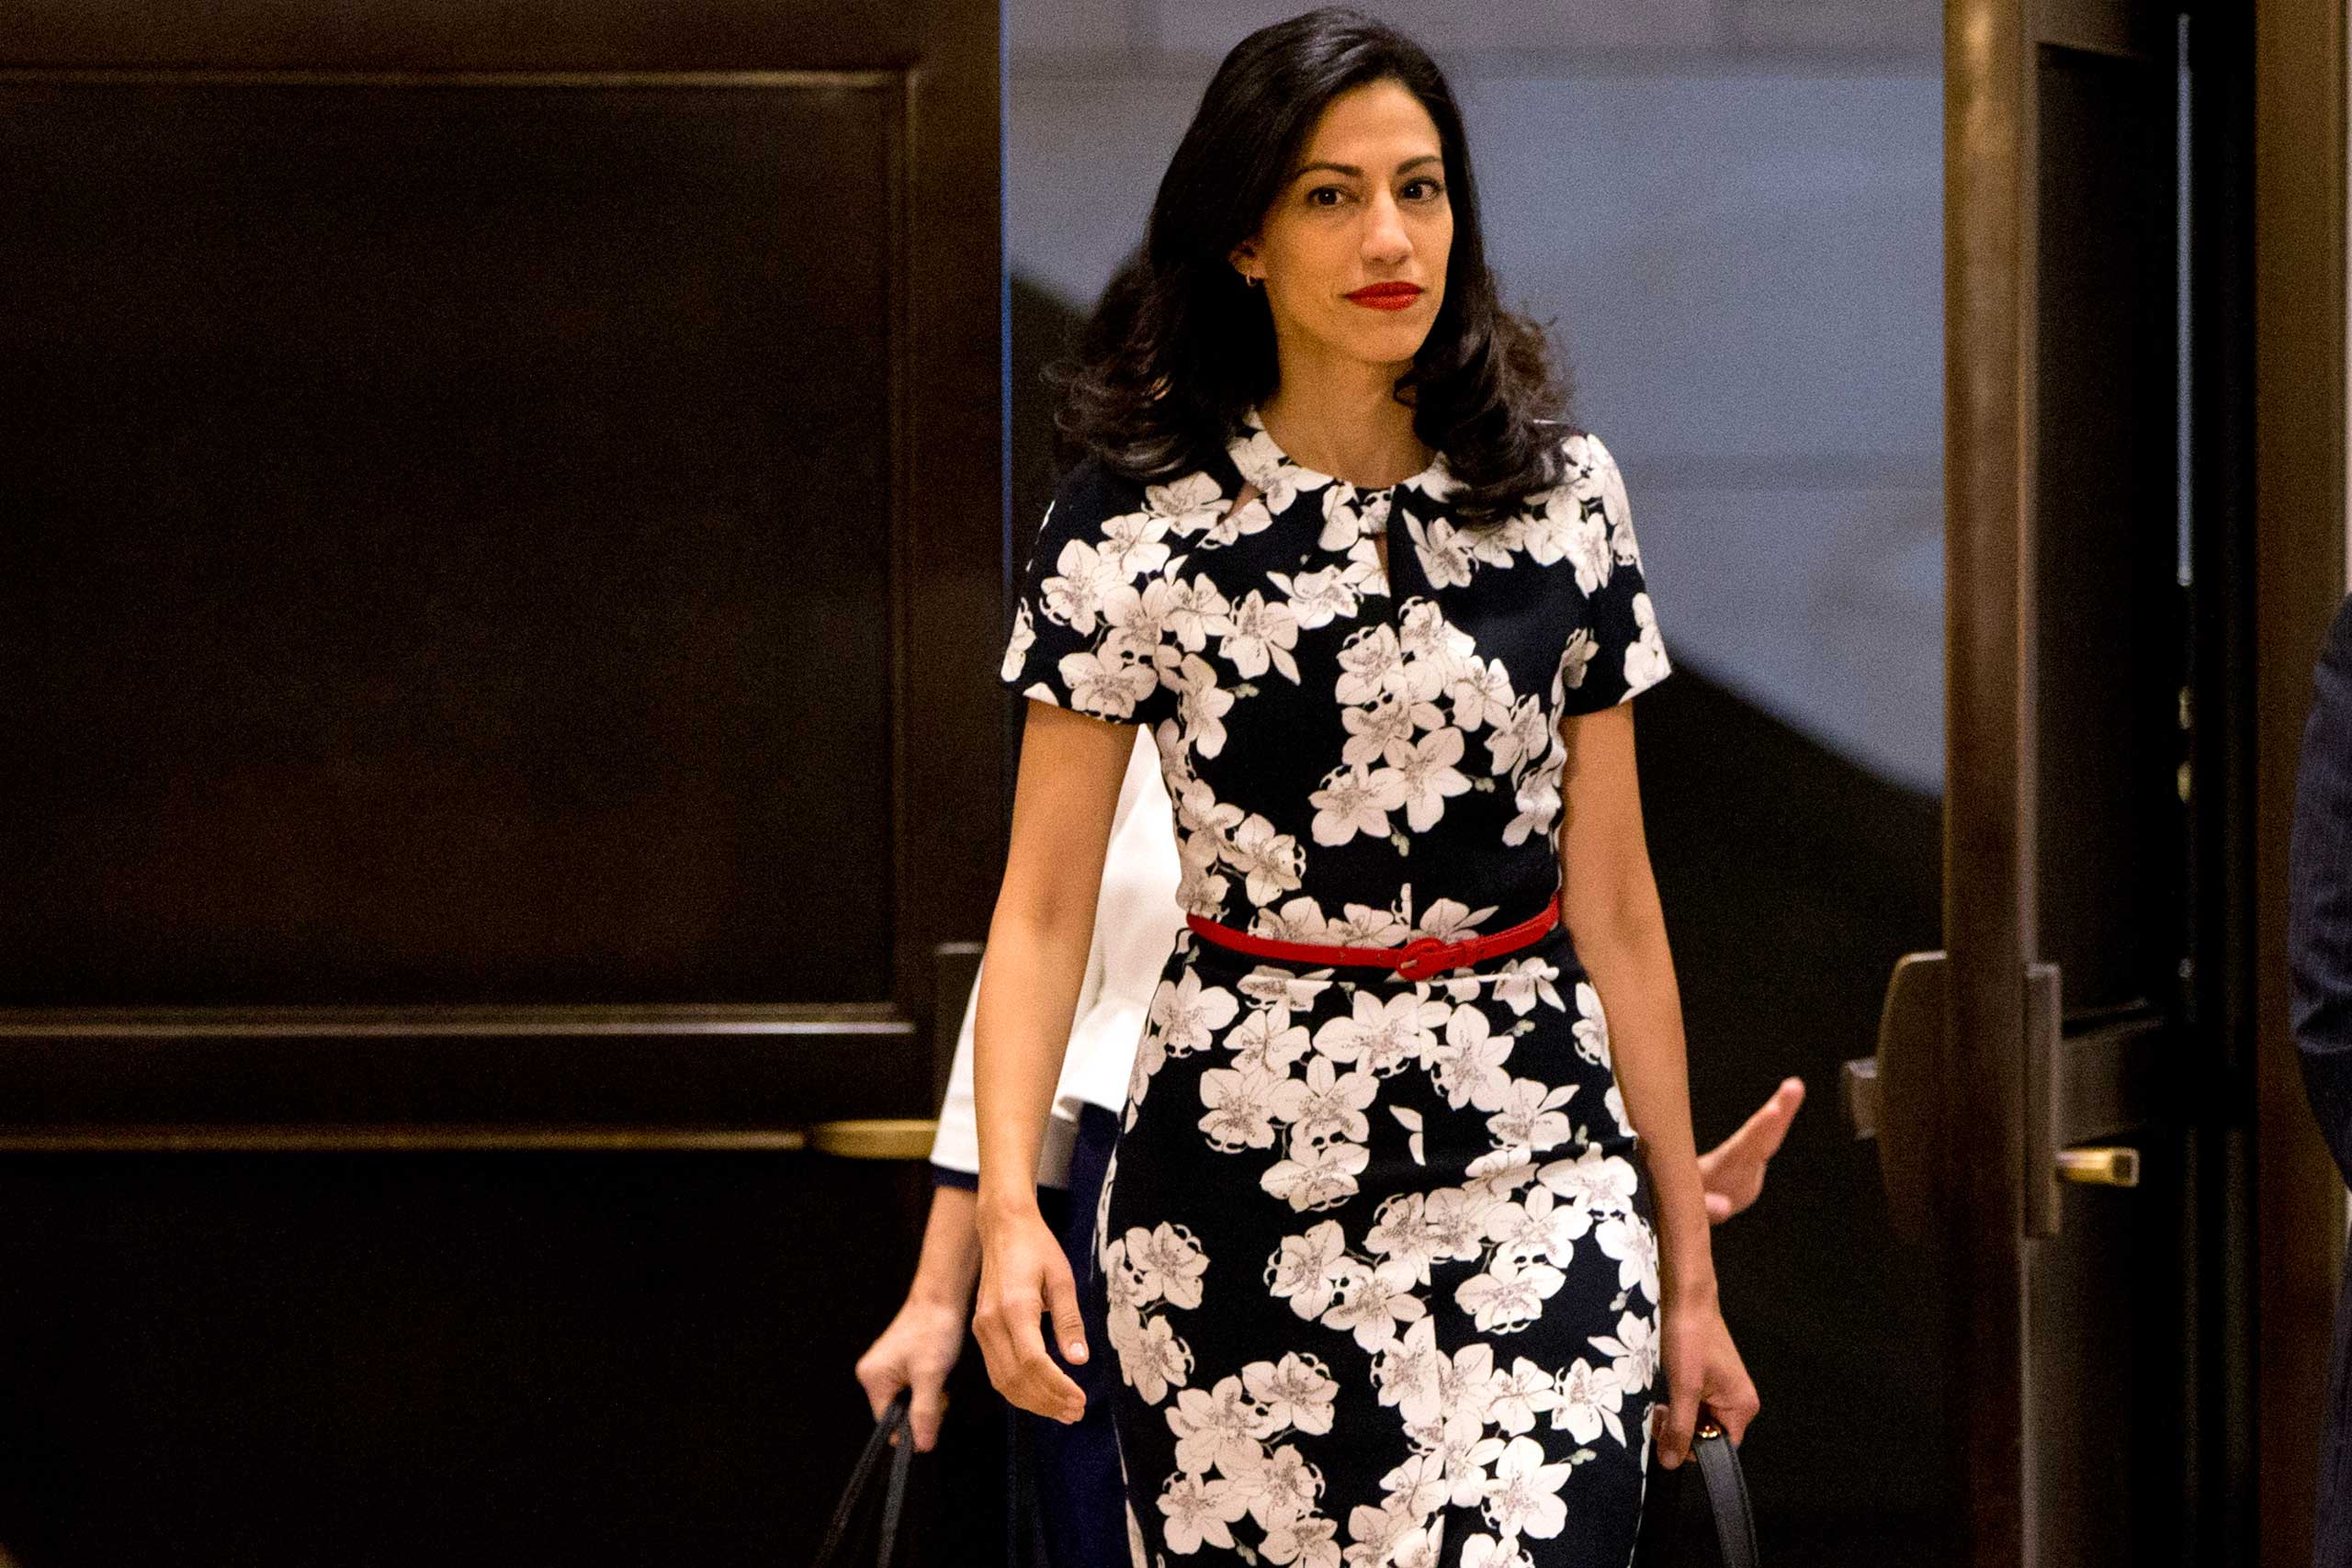 Huma Abedin,  a close aide to Hillary Rodham Clinton arrives on Capitol Hill in Washington to testify before a closed-door hearing of the House Benghazi Committee investigating the deadly attacks in Benghazi, Libya, Oct. 16, 2015. (Jacquelyn Martin—AP)